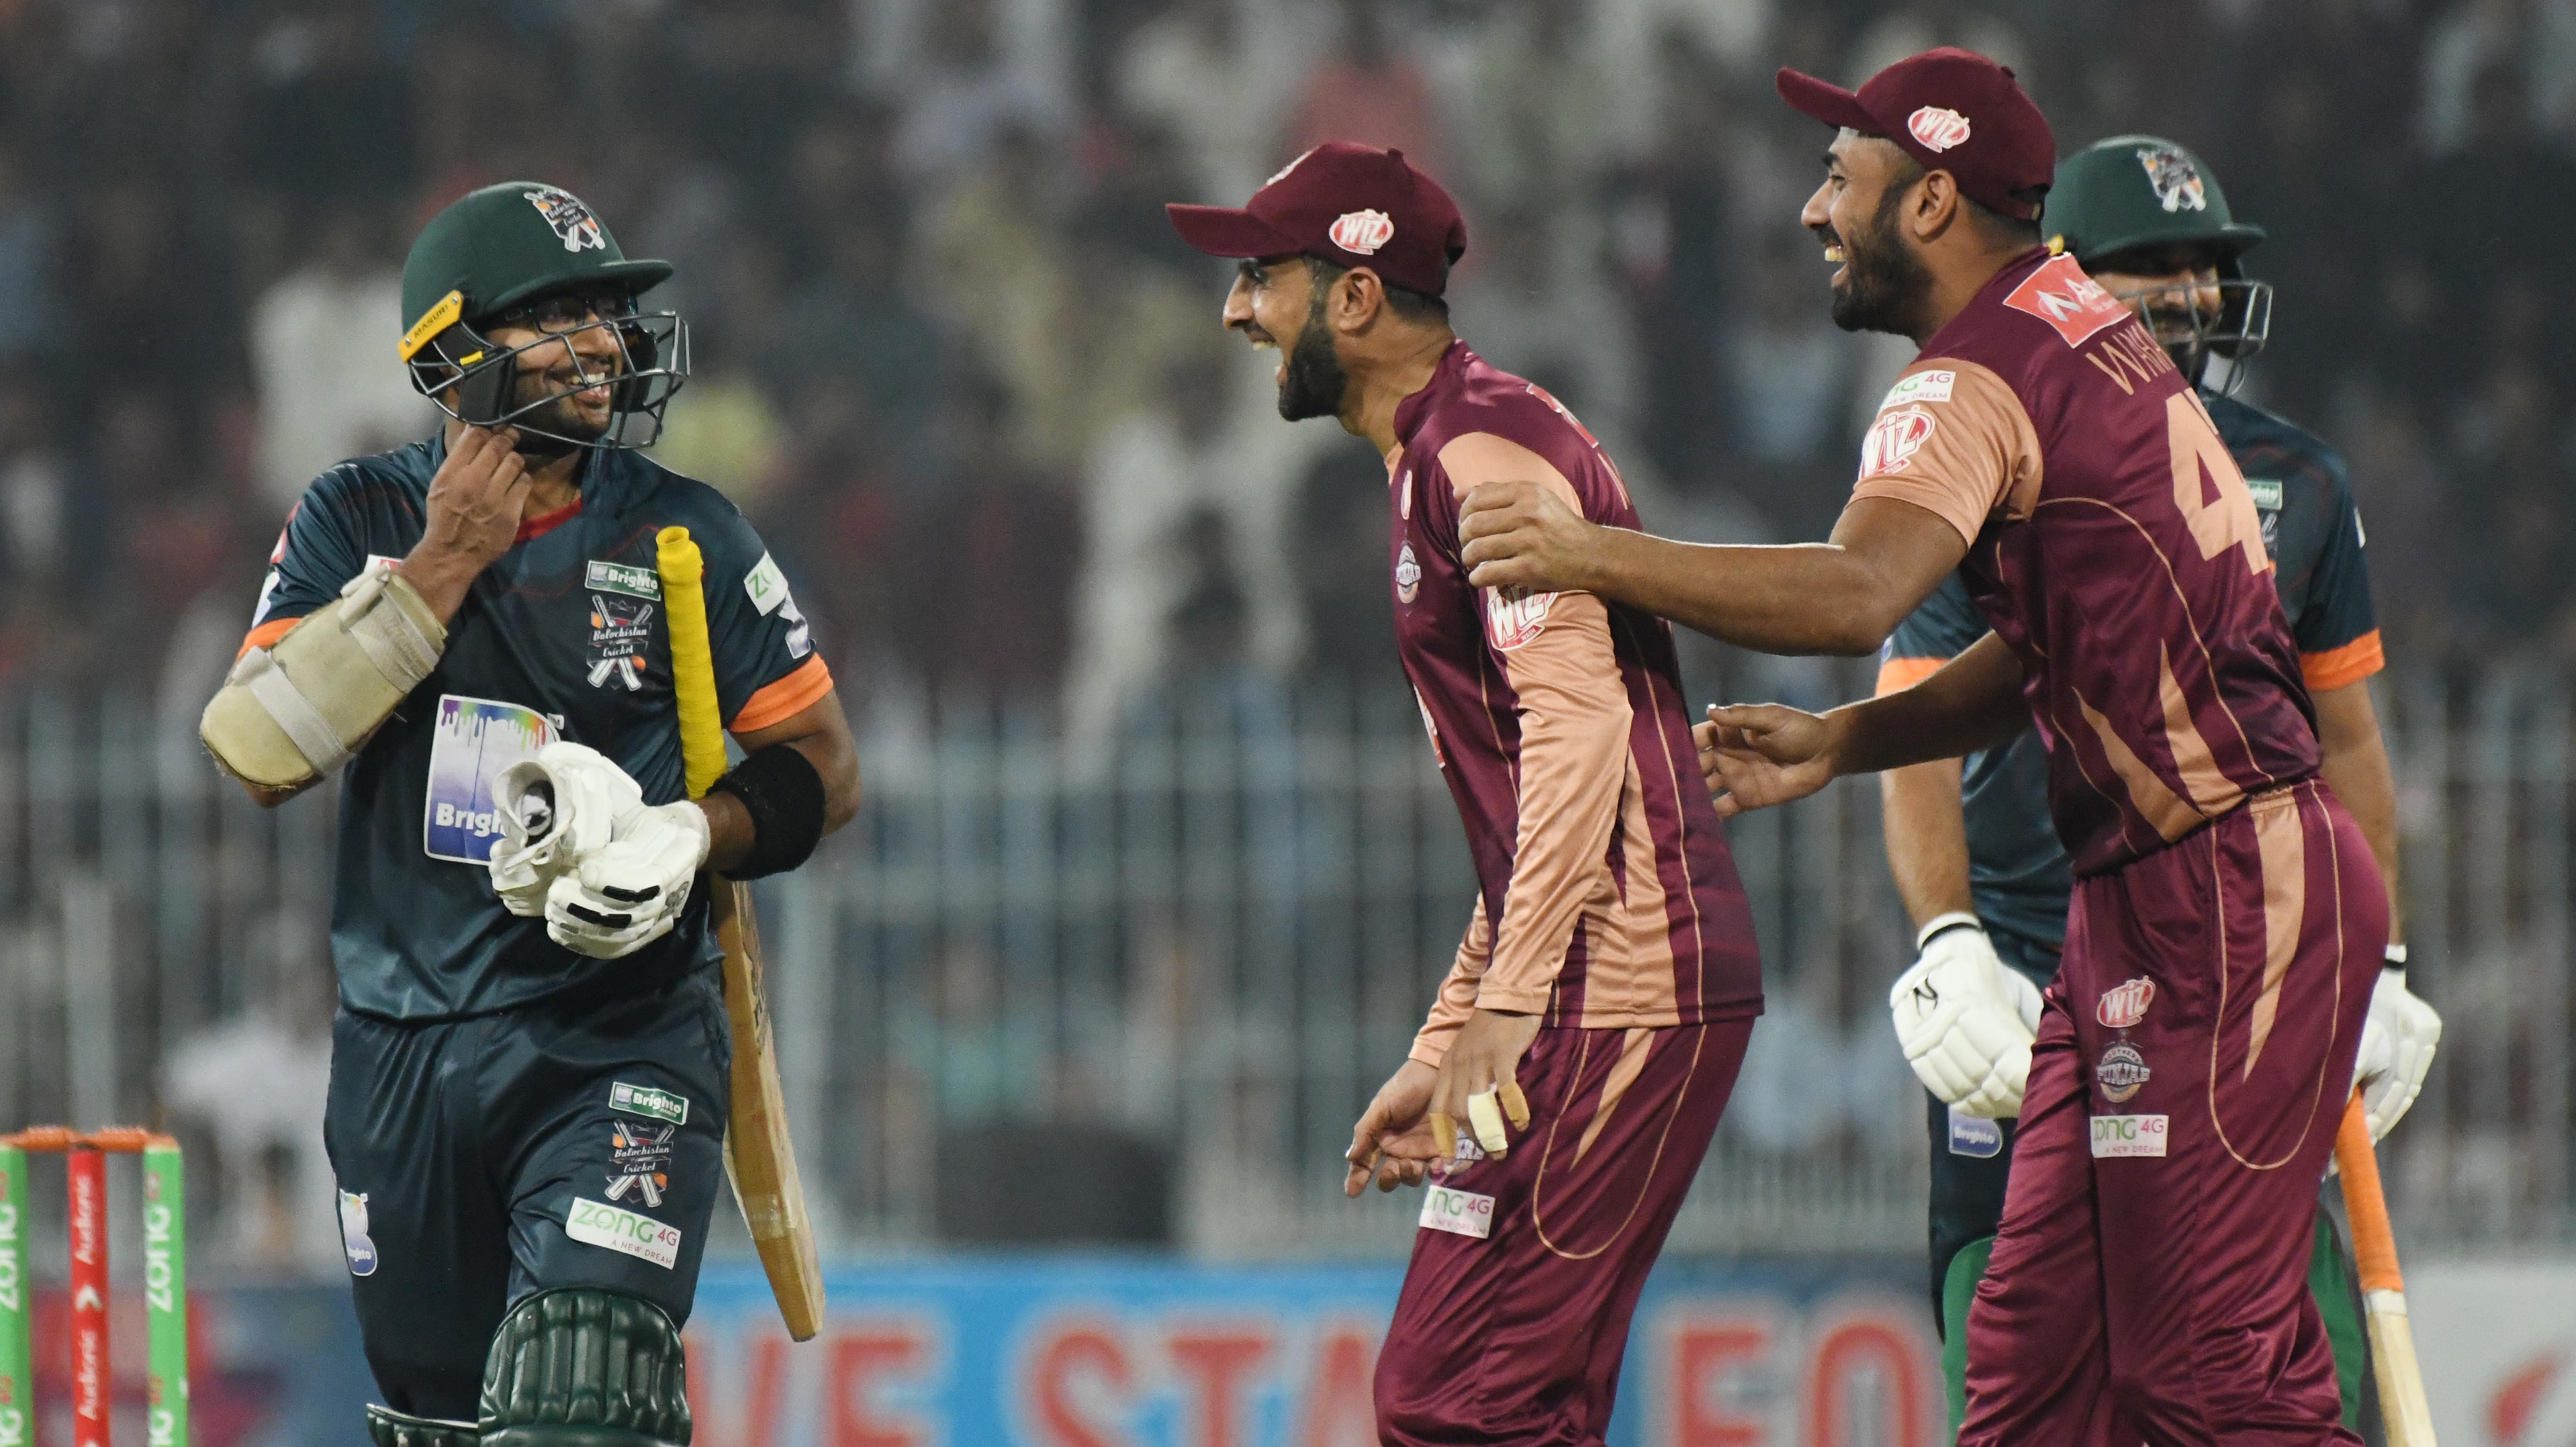 National T20 Cup KP the popular choice as experts make their predictions - Cricket